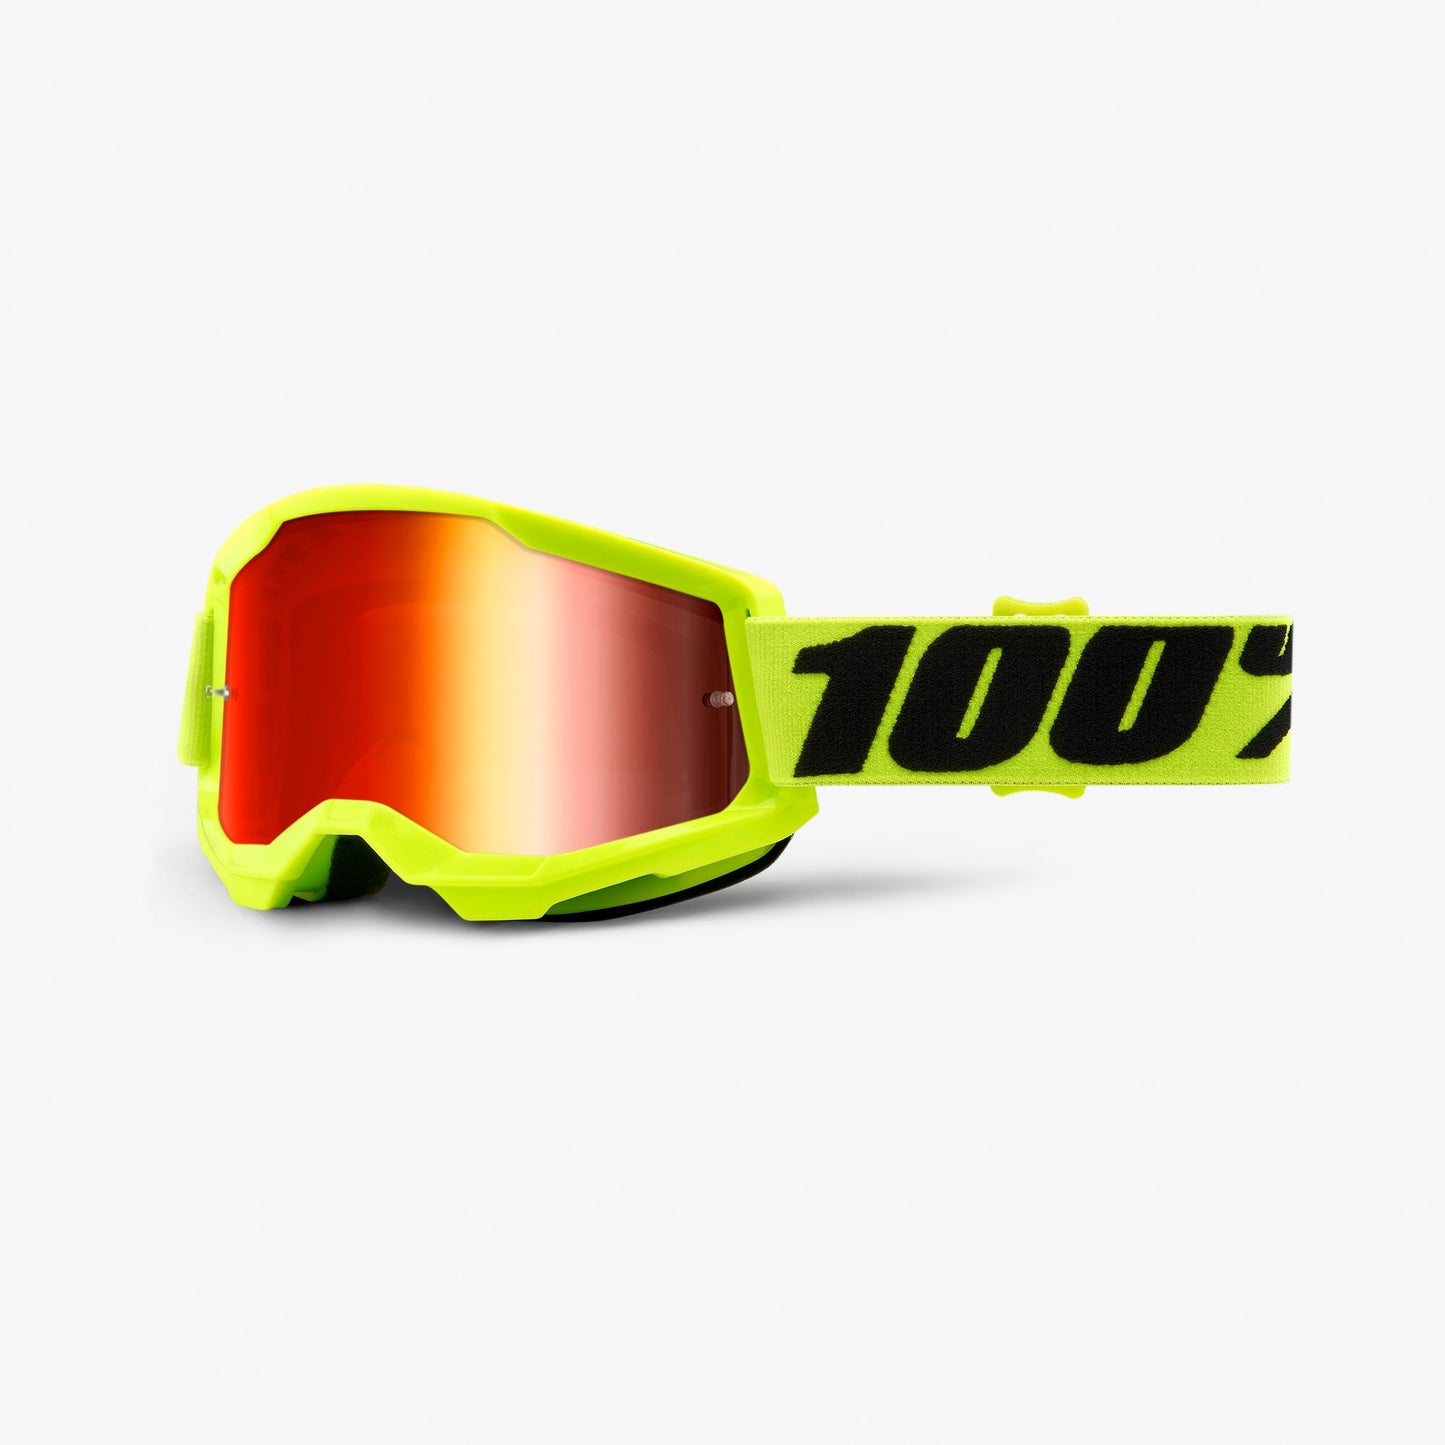 100% Strata 2 Goggles Yellow - Red Mirror Lens - Youth - 50421-251-04